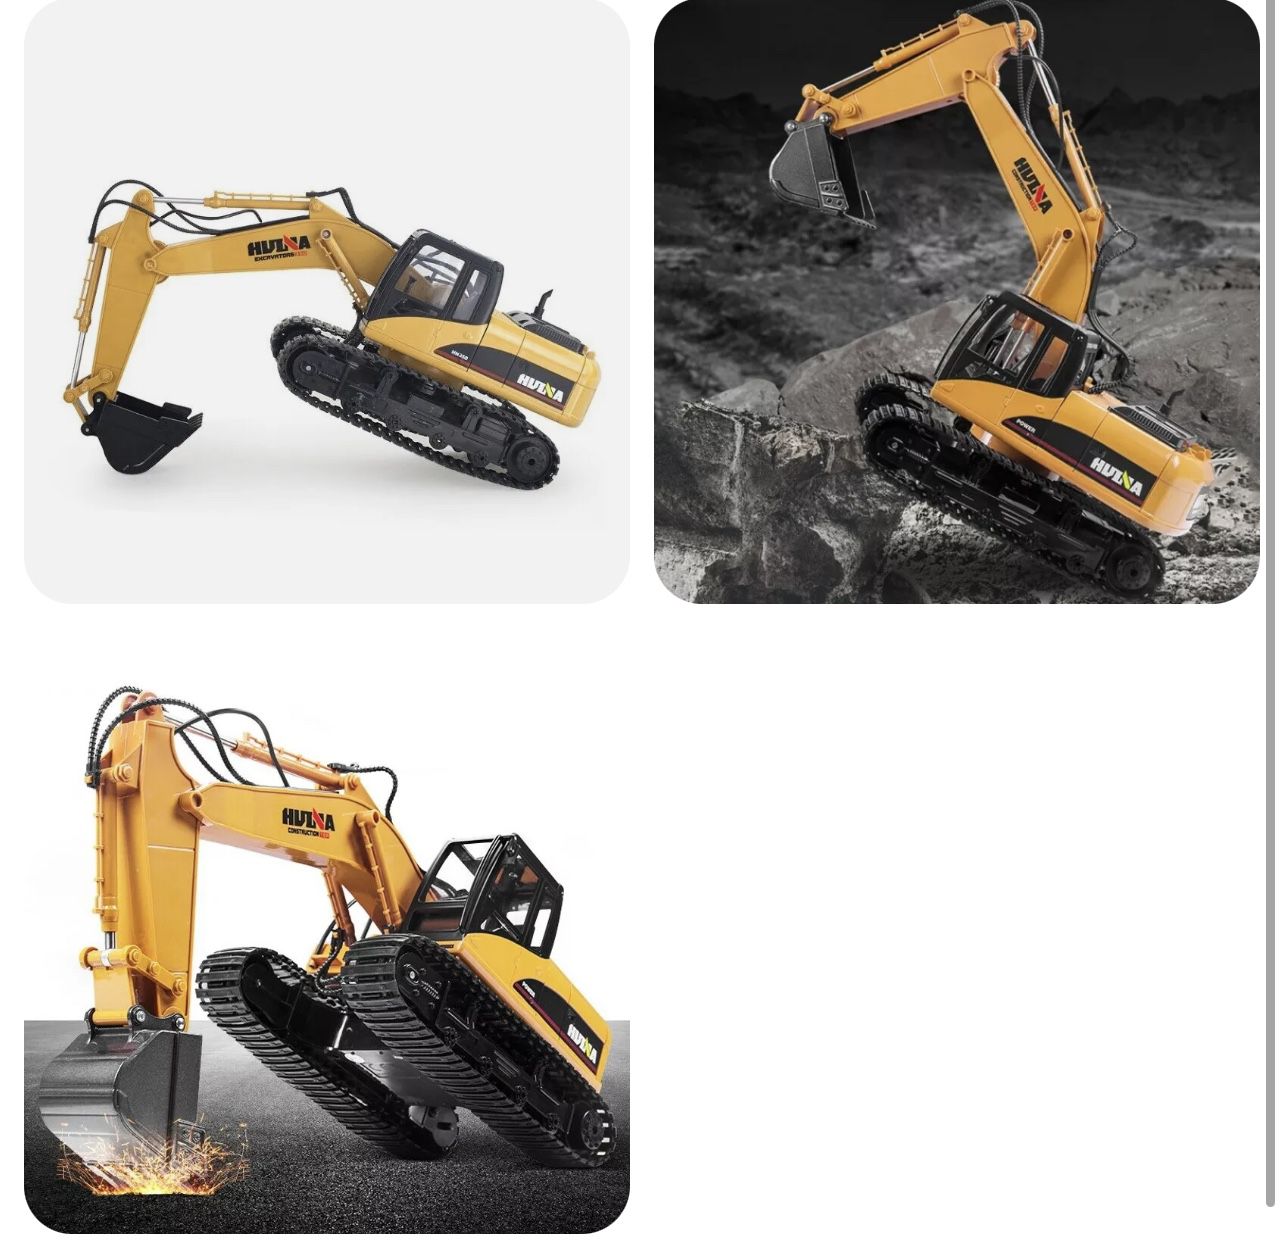 Excavator For Sale New In Sealed Box Isn’t Metal Is A Plastic But Good And Quality 